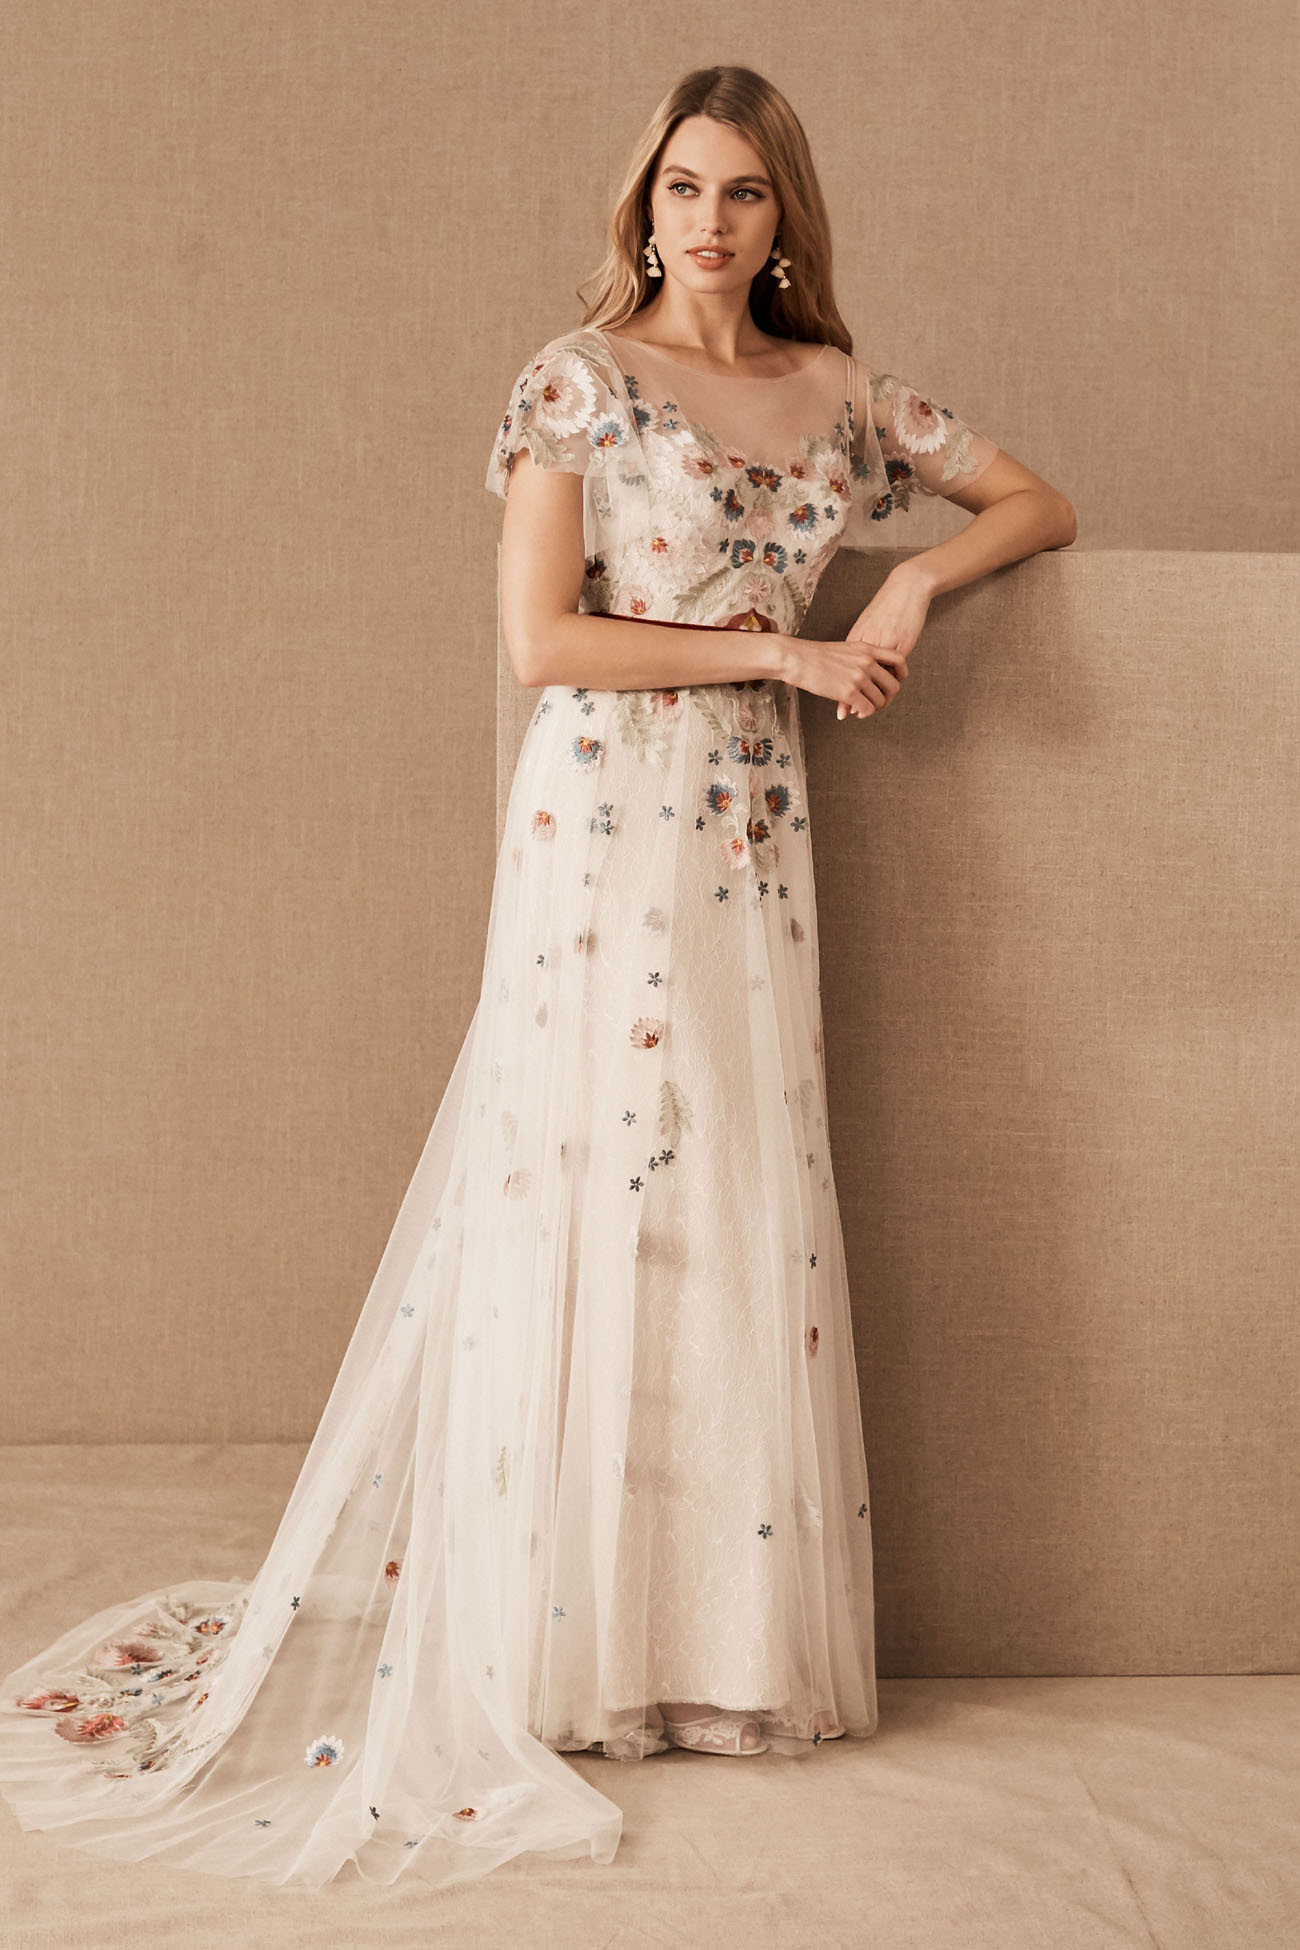 Embroidered Wedding Dress
 Trending Now The Embroidered Wedding Dress These